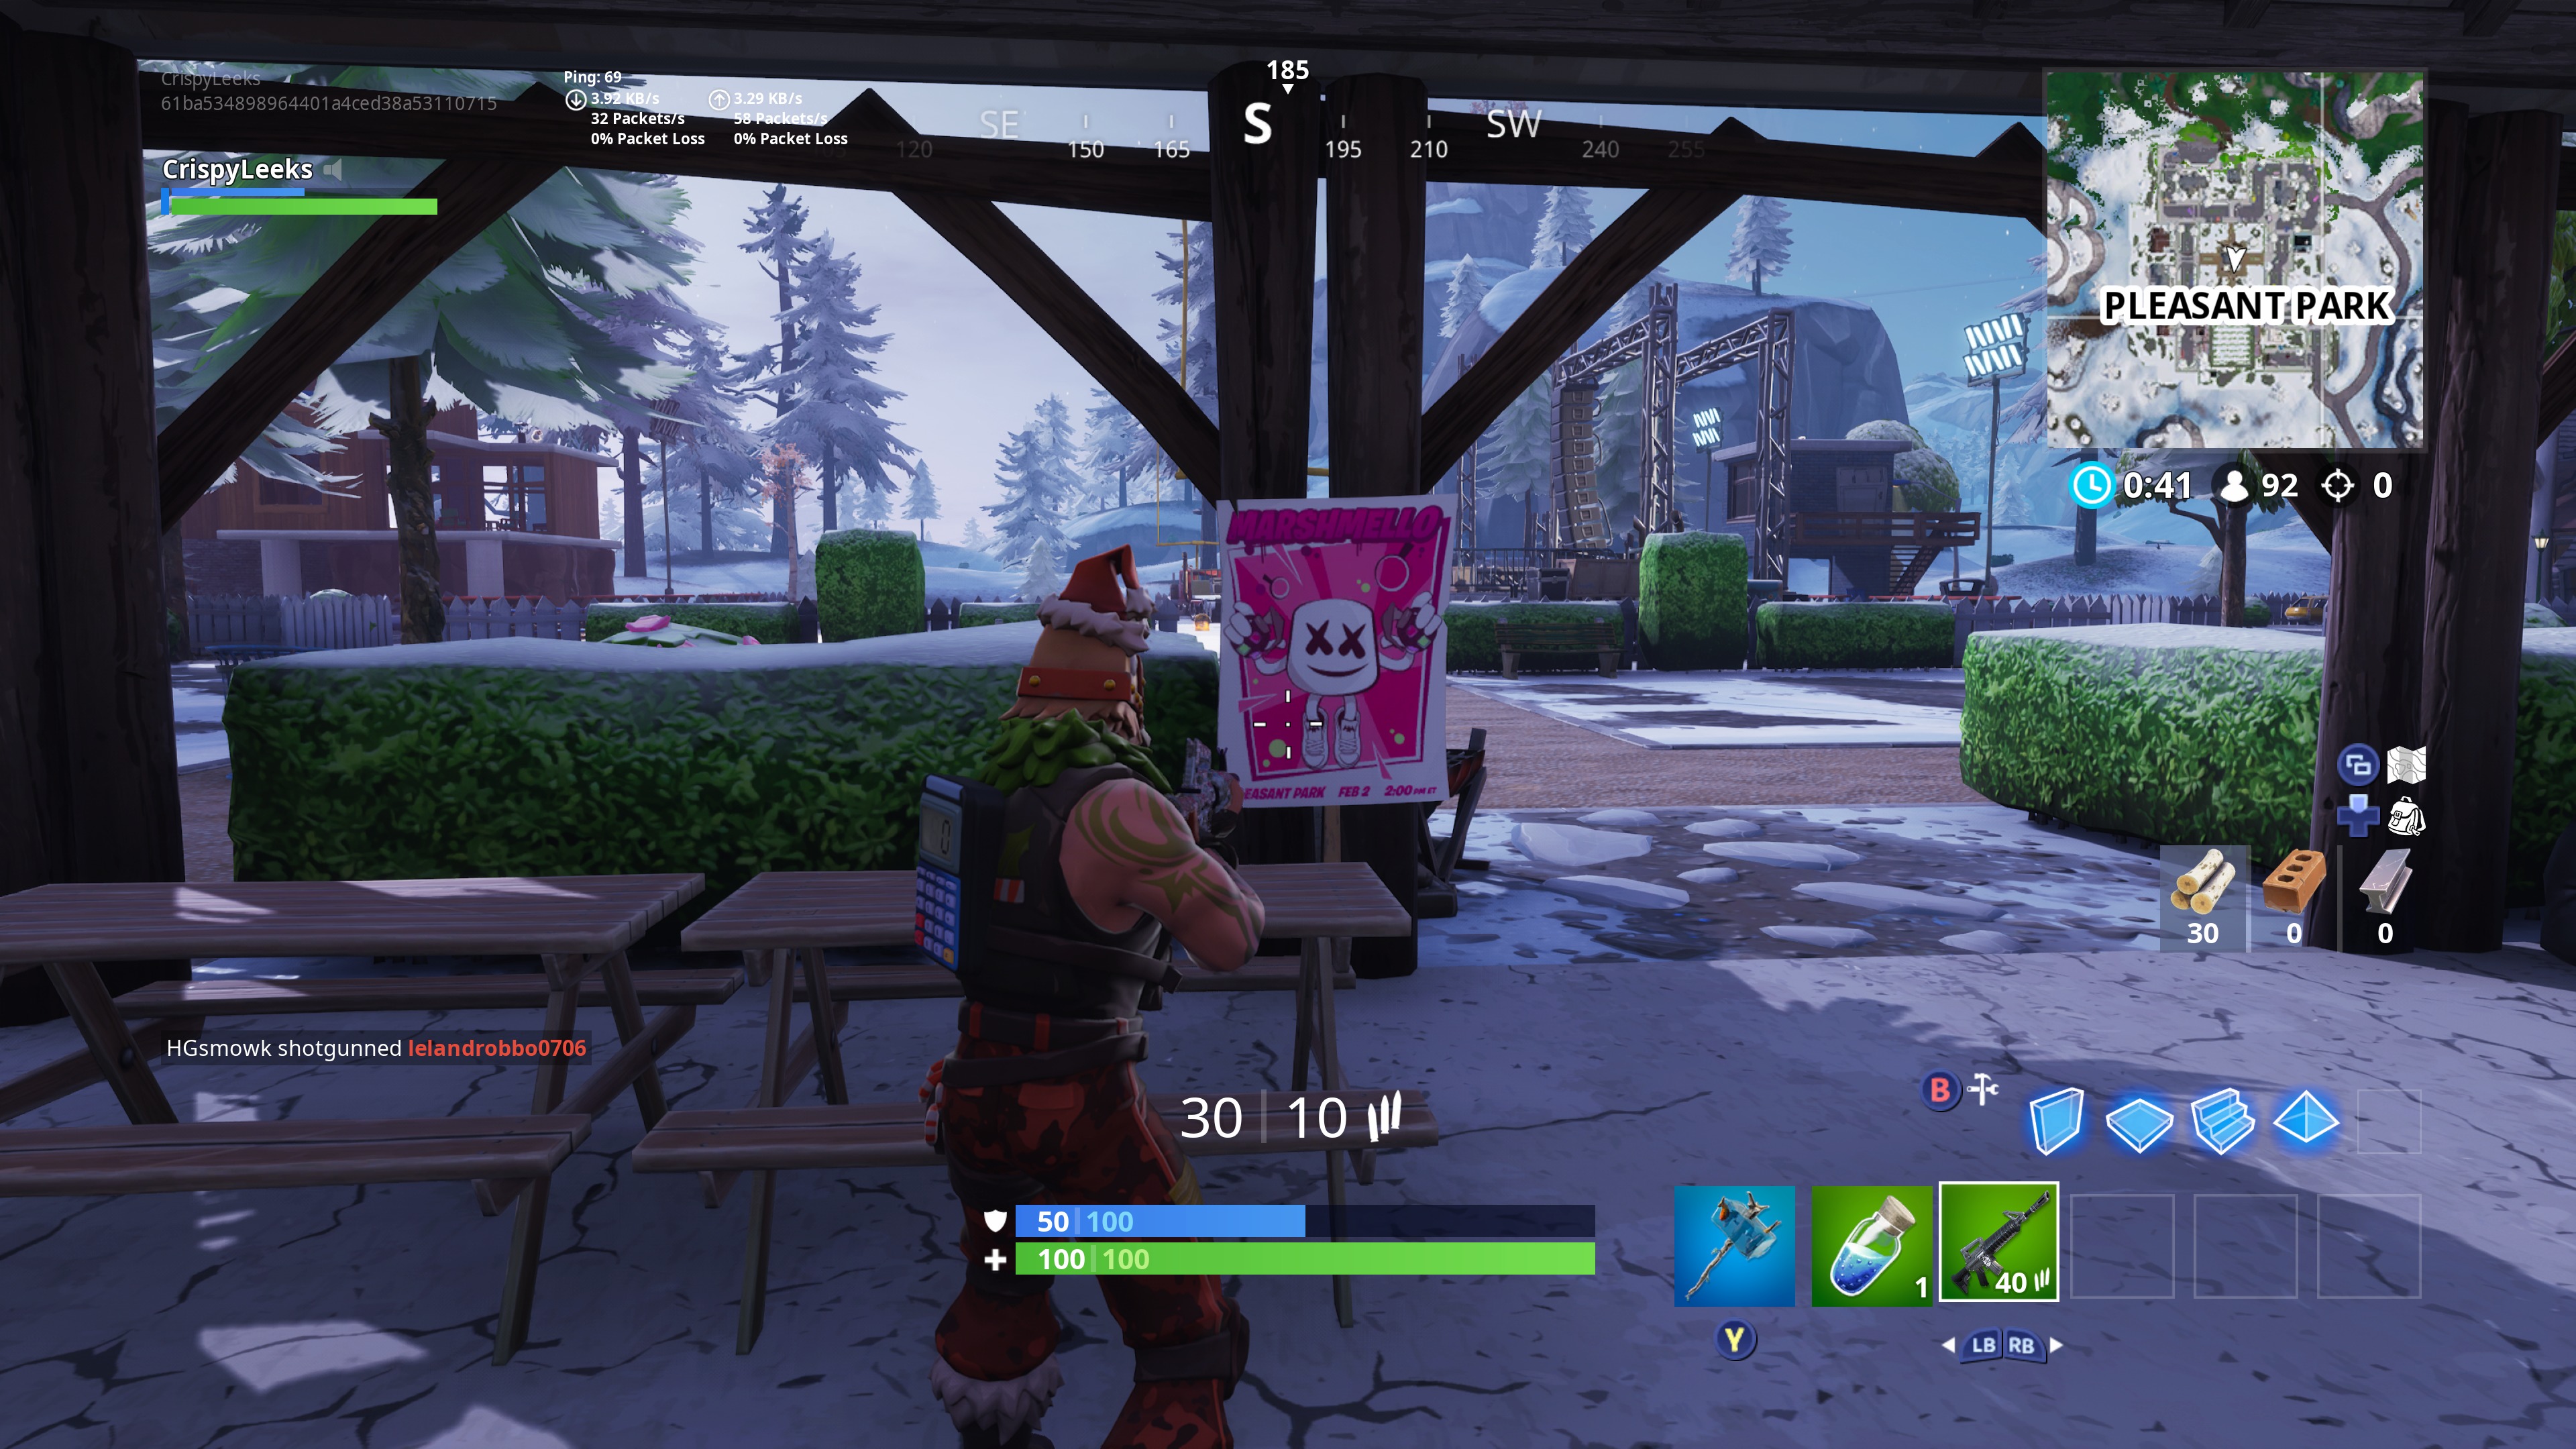 Search a Showtime Poster in Fortnite